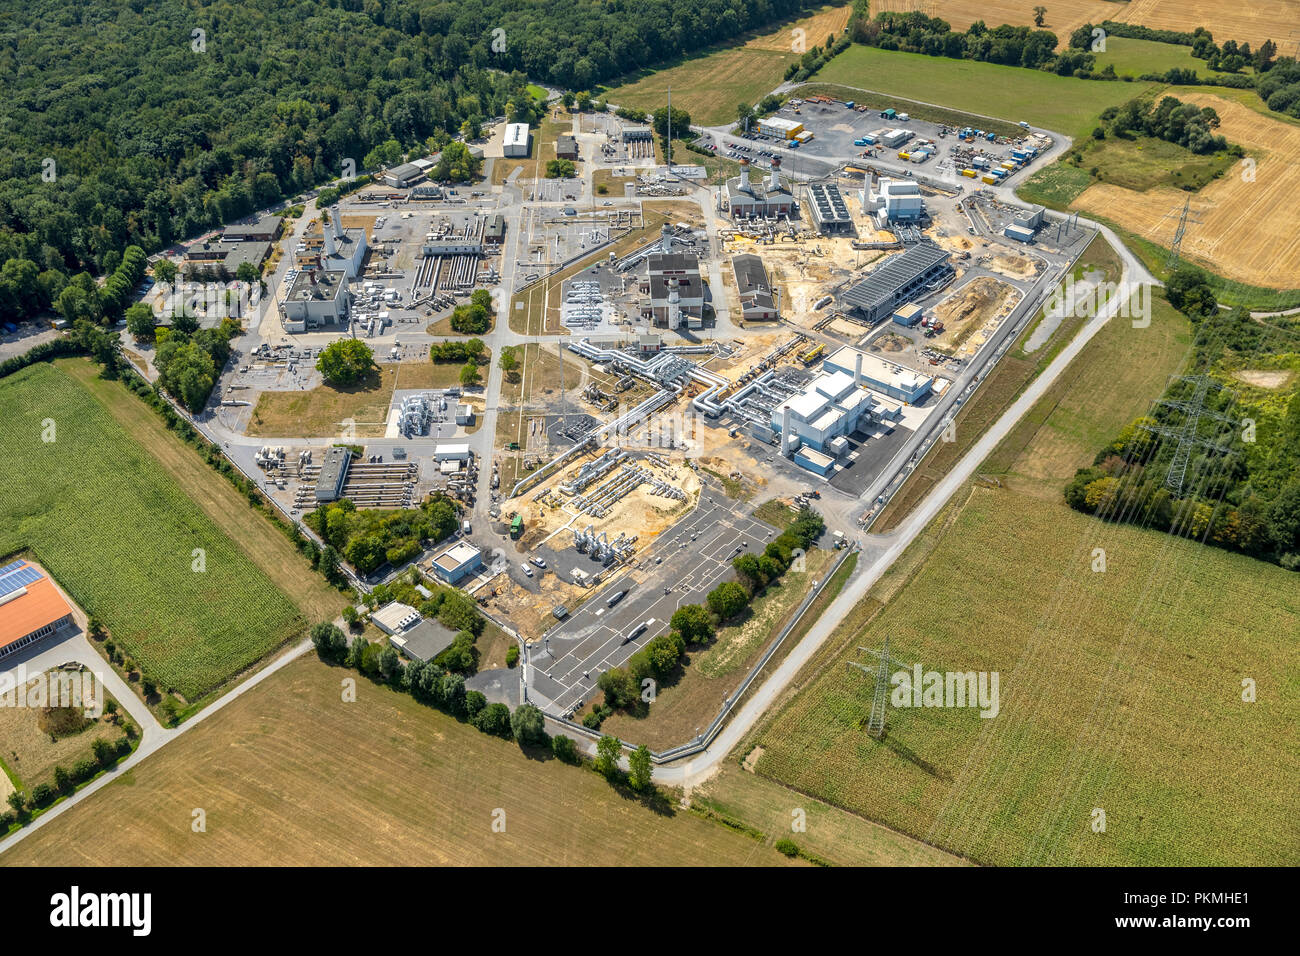 Aerial view, Natural gas compressor station, Open Grid Europe, Werne, Ruhr Area, North Rhine-Westphalia, Germany Stock Photo